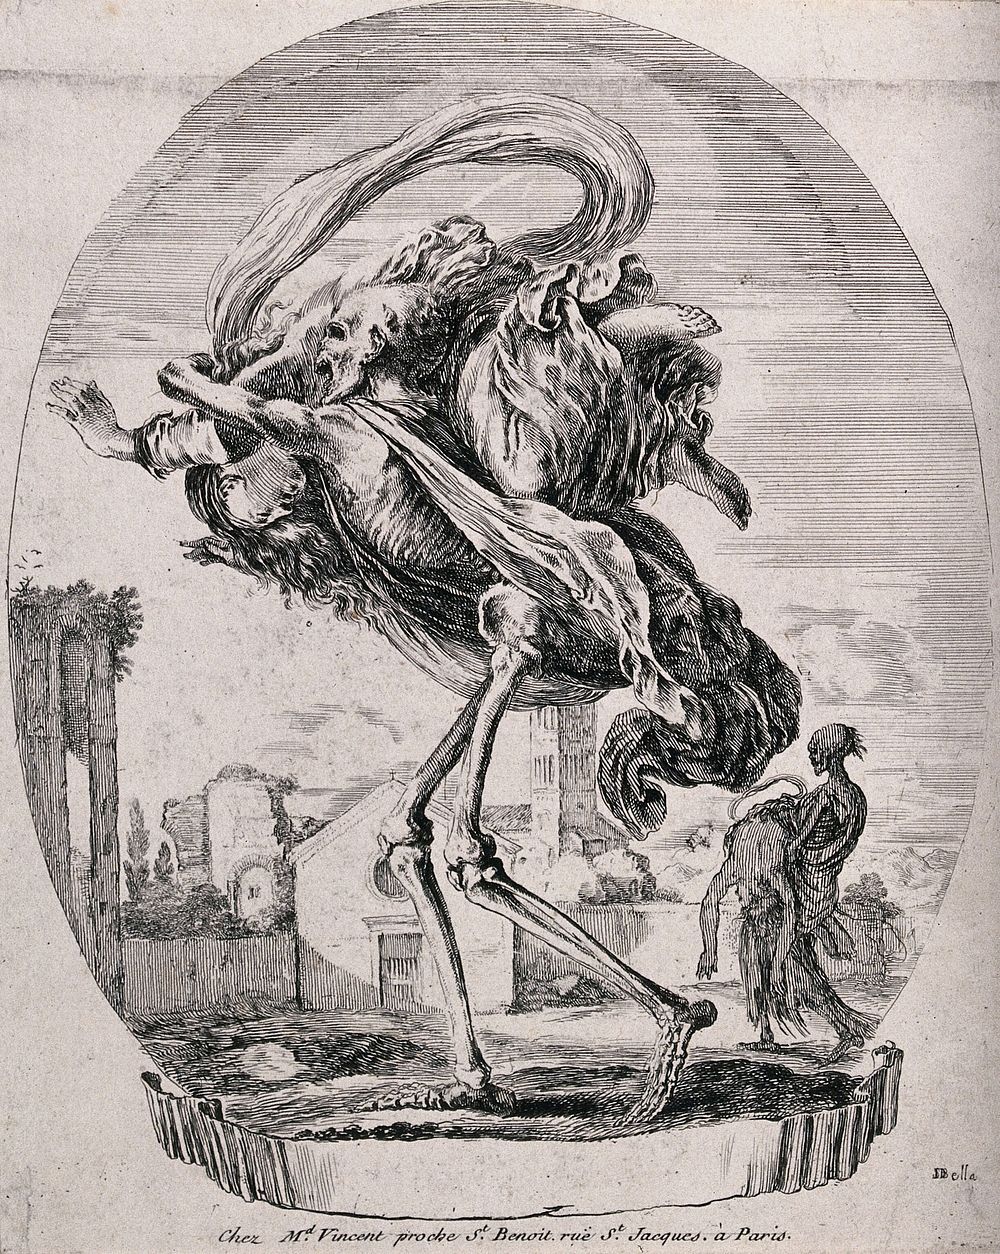 Death carries a woman over his shoulders. Etching by Stefano della Bella.